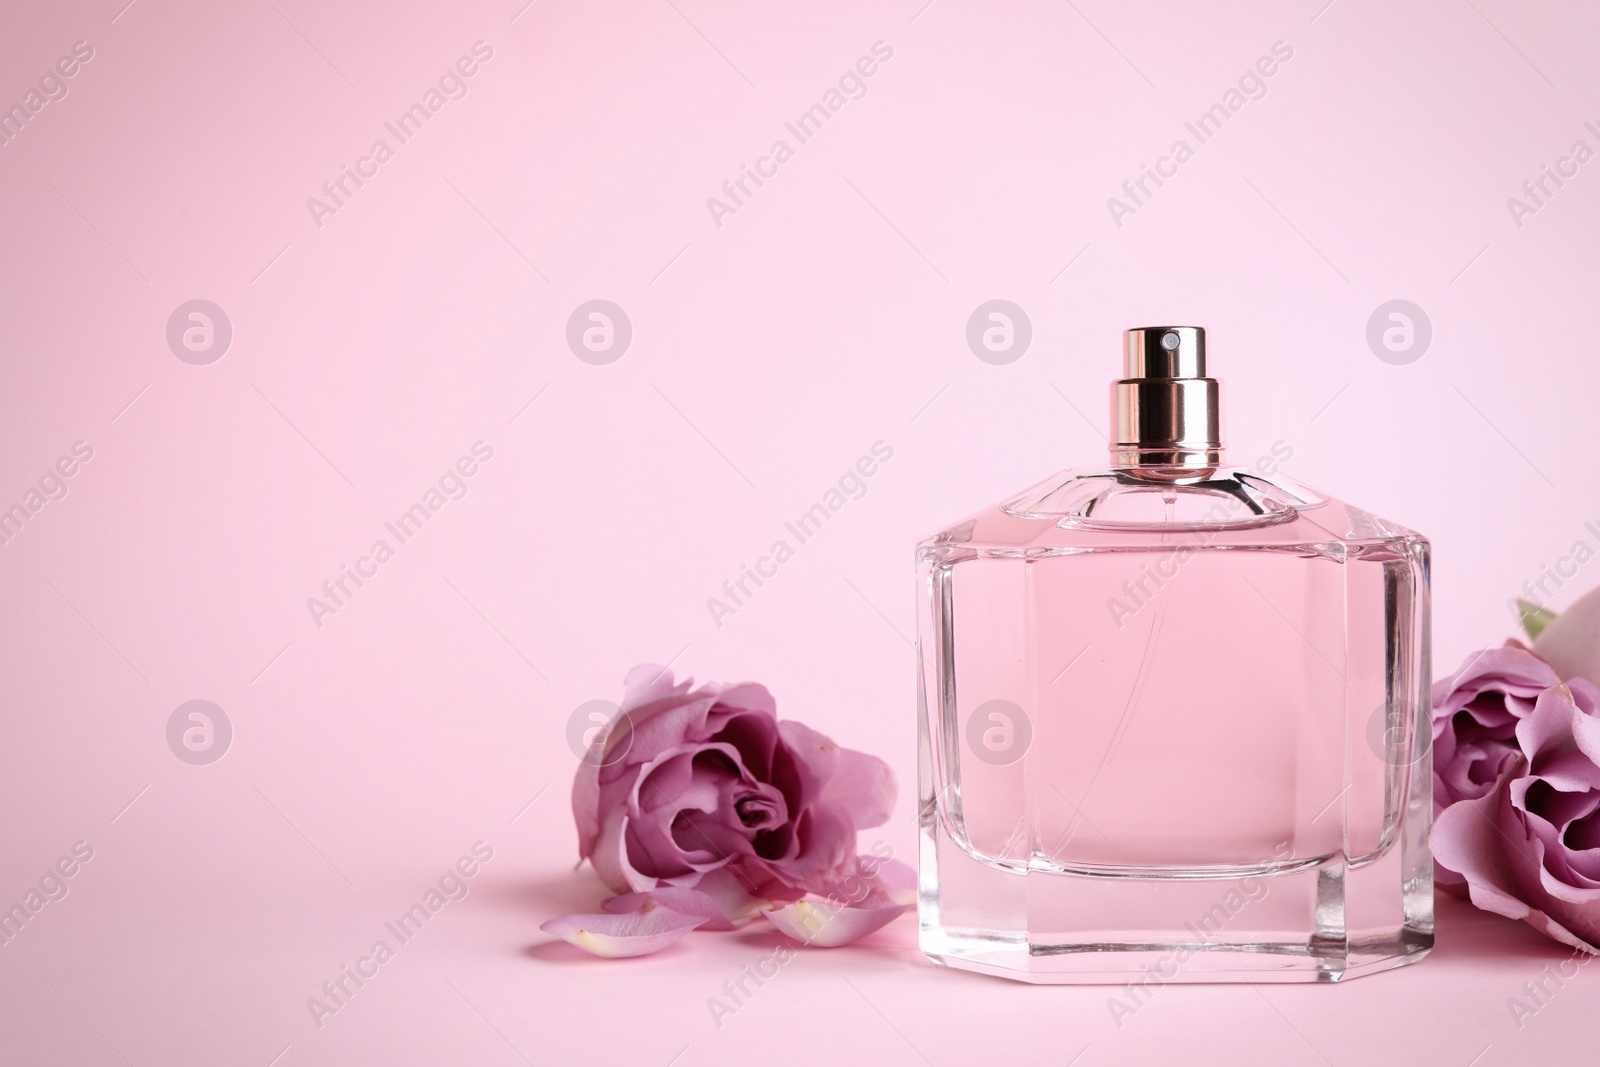 Photo of Bottle of perfume and beautiful roses on pink background. Space for text